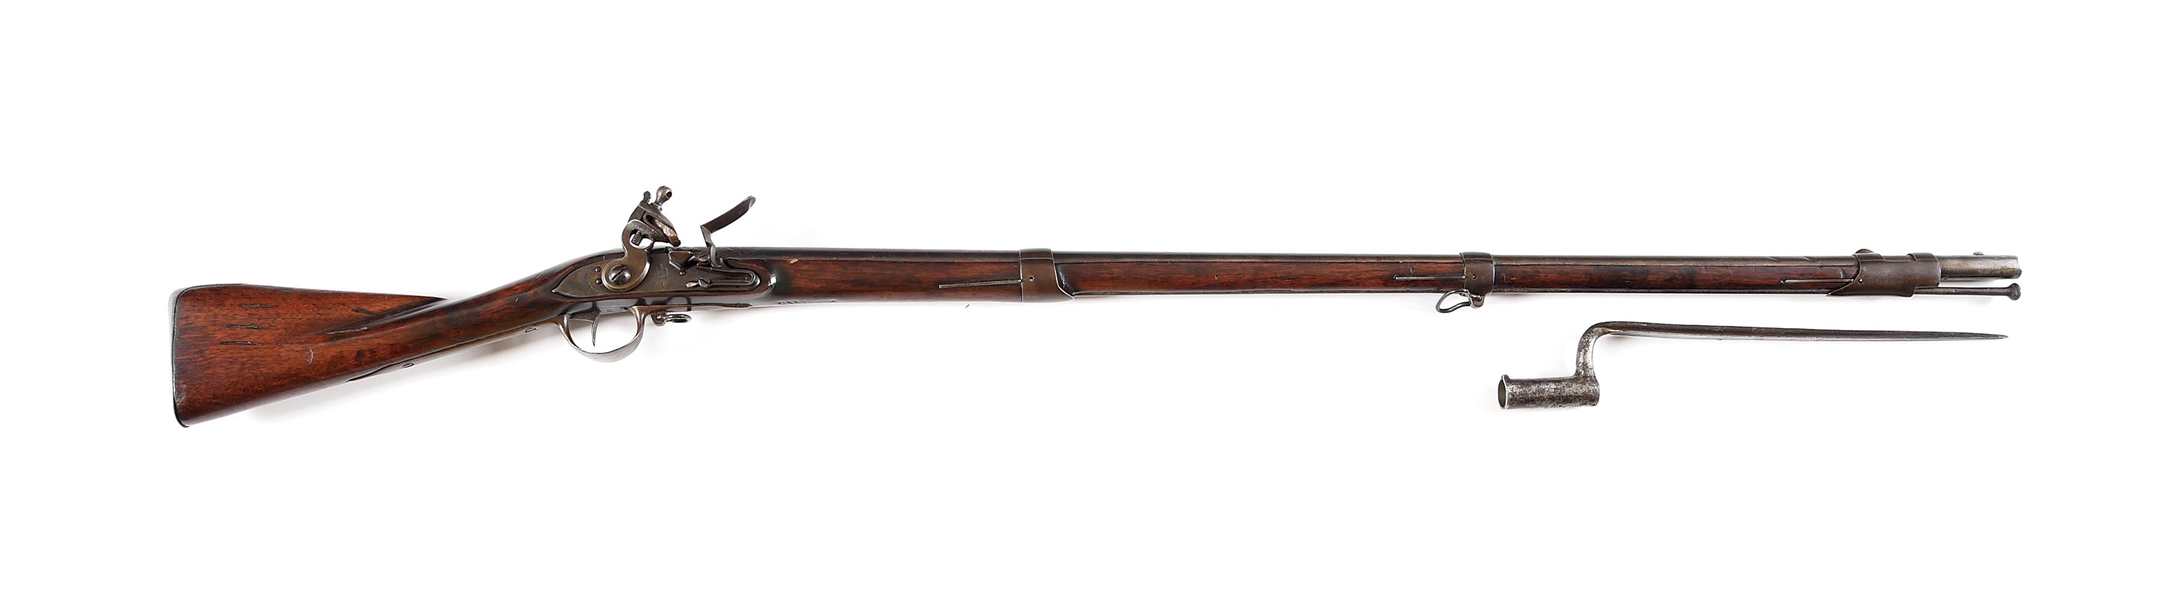 (A) MARYLAND BRANDED 1800 DATED US SPRINGFIELD MODEL 1795 MUSKET WITH BAYONET.